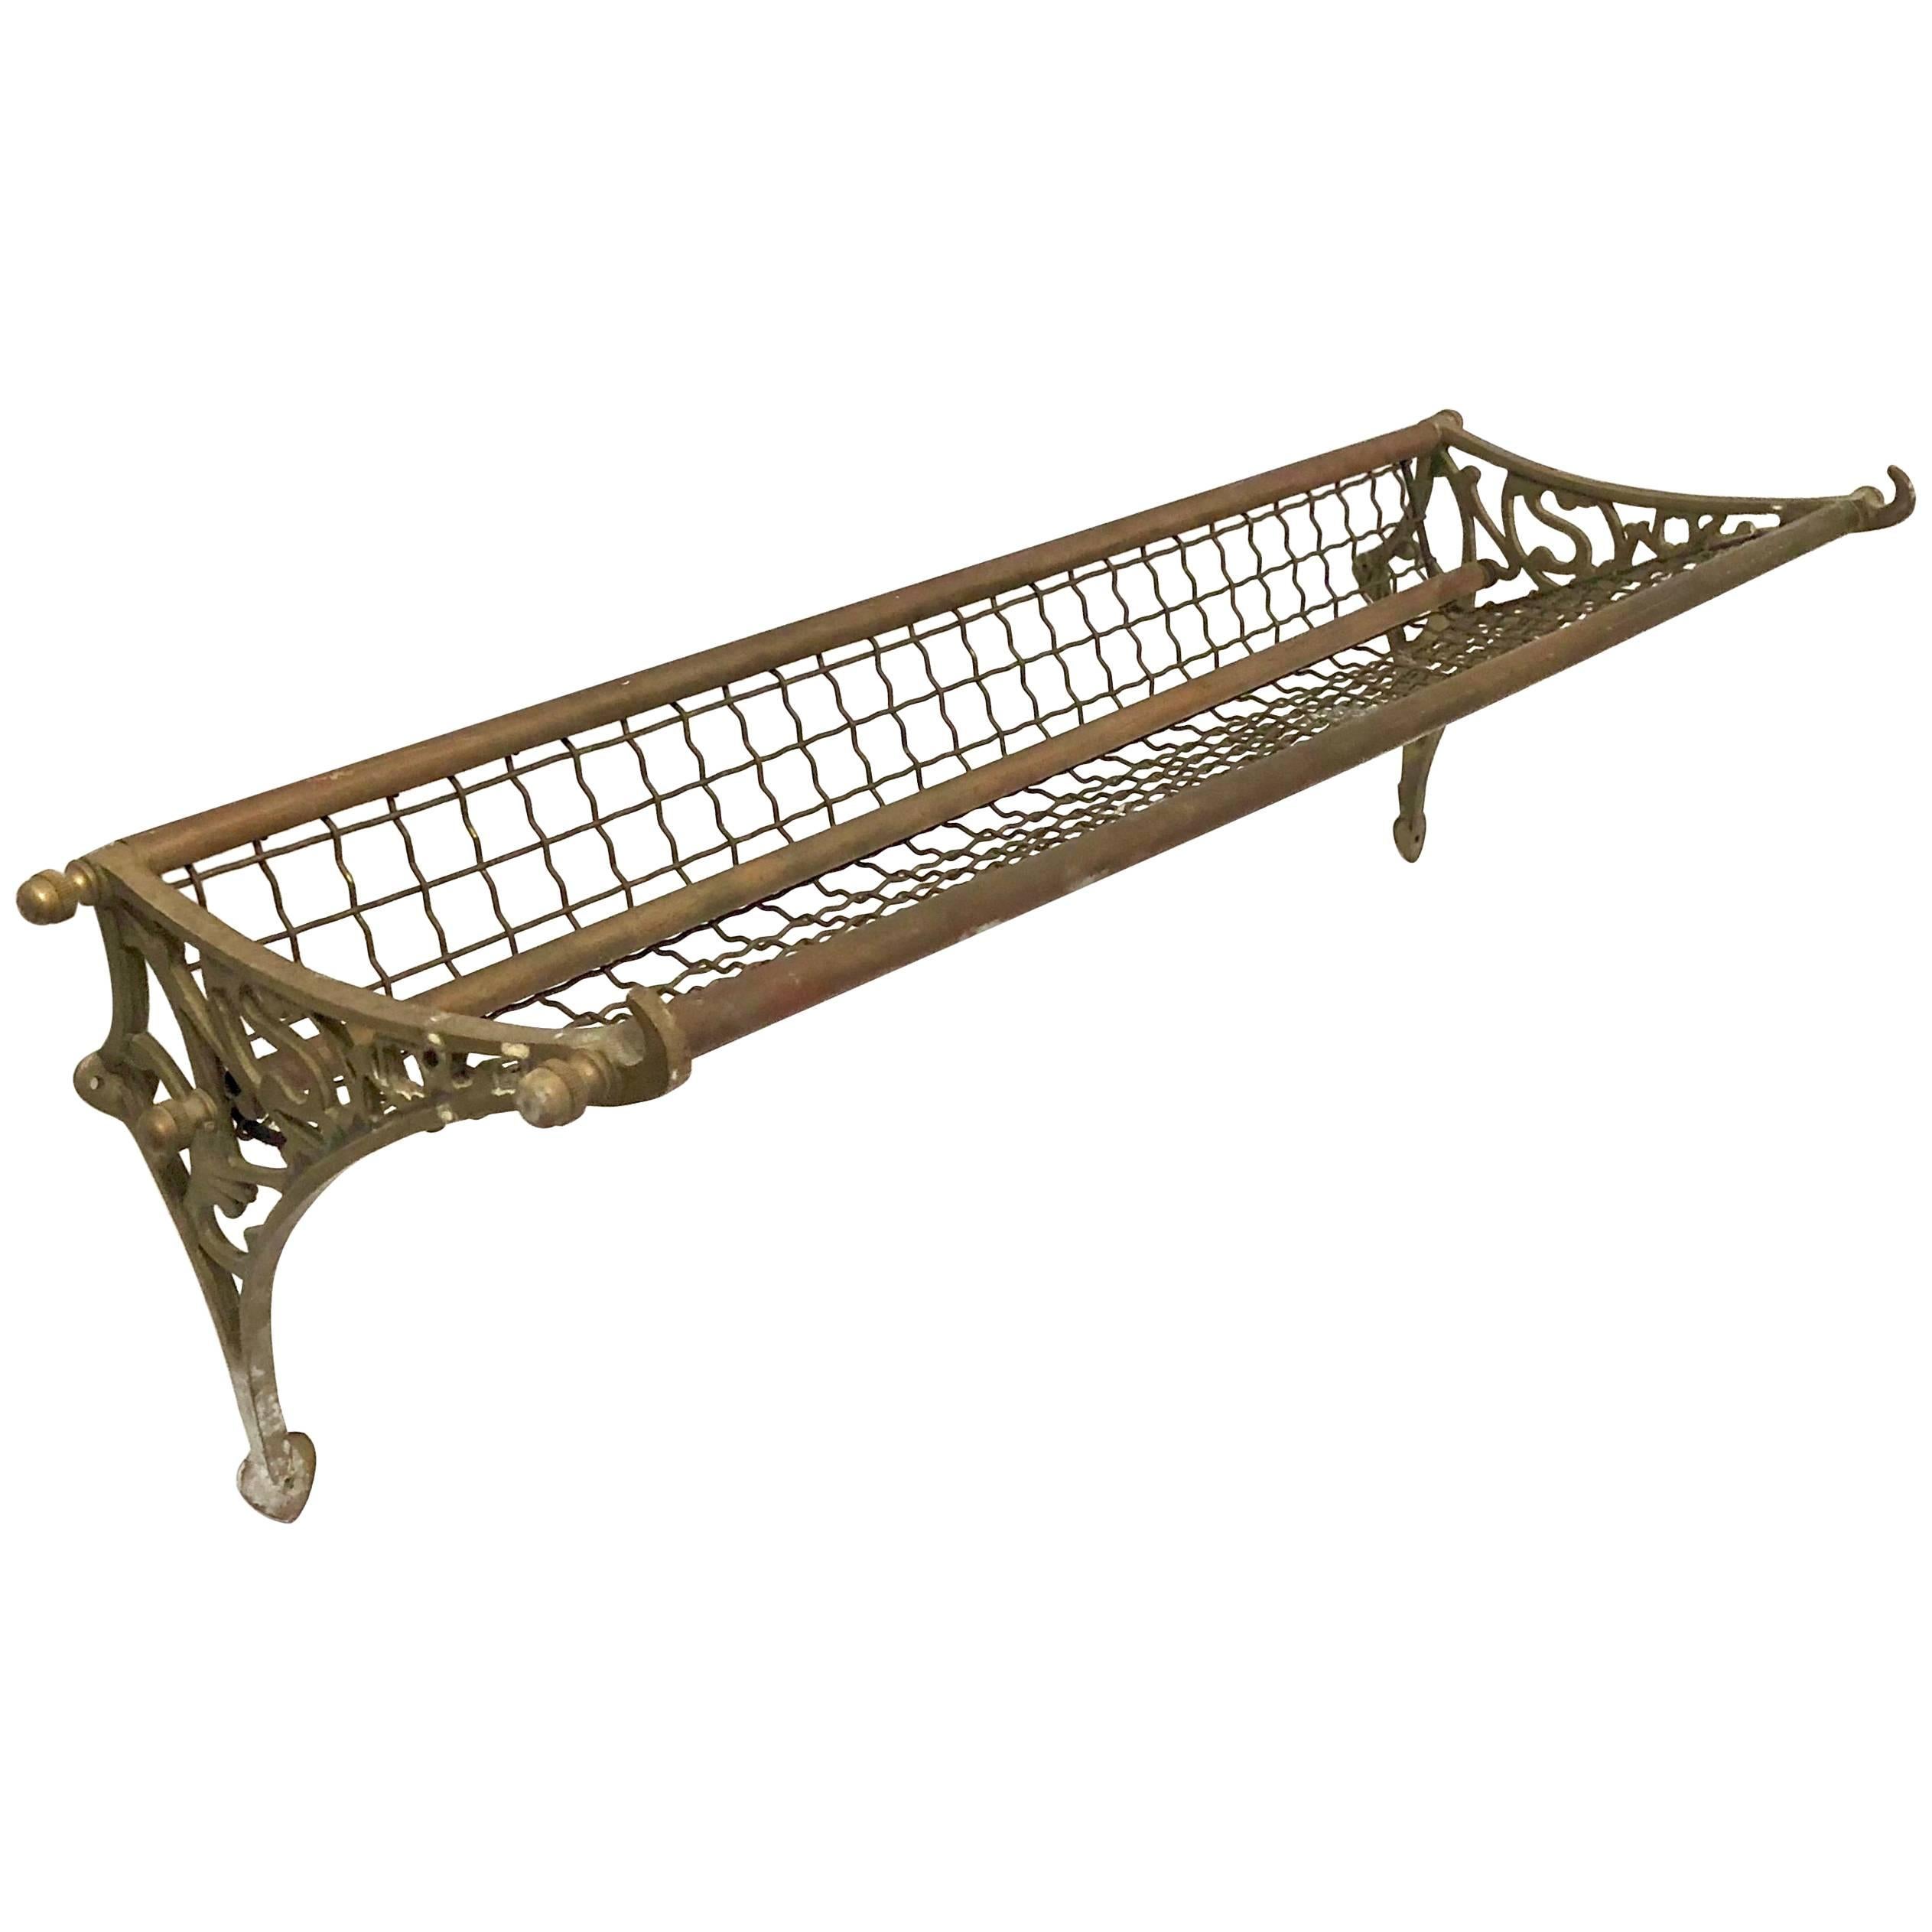 Antique Patinated Copper and Brass Bus/Train Luggage Rack